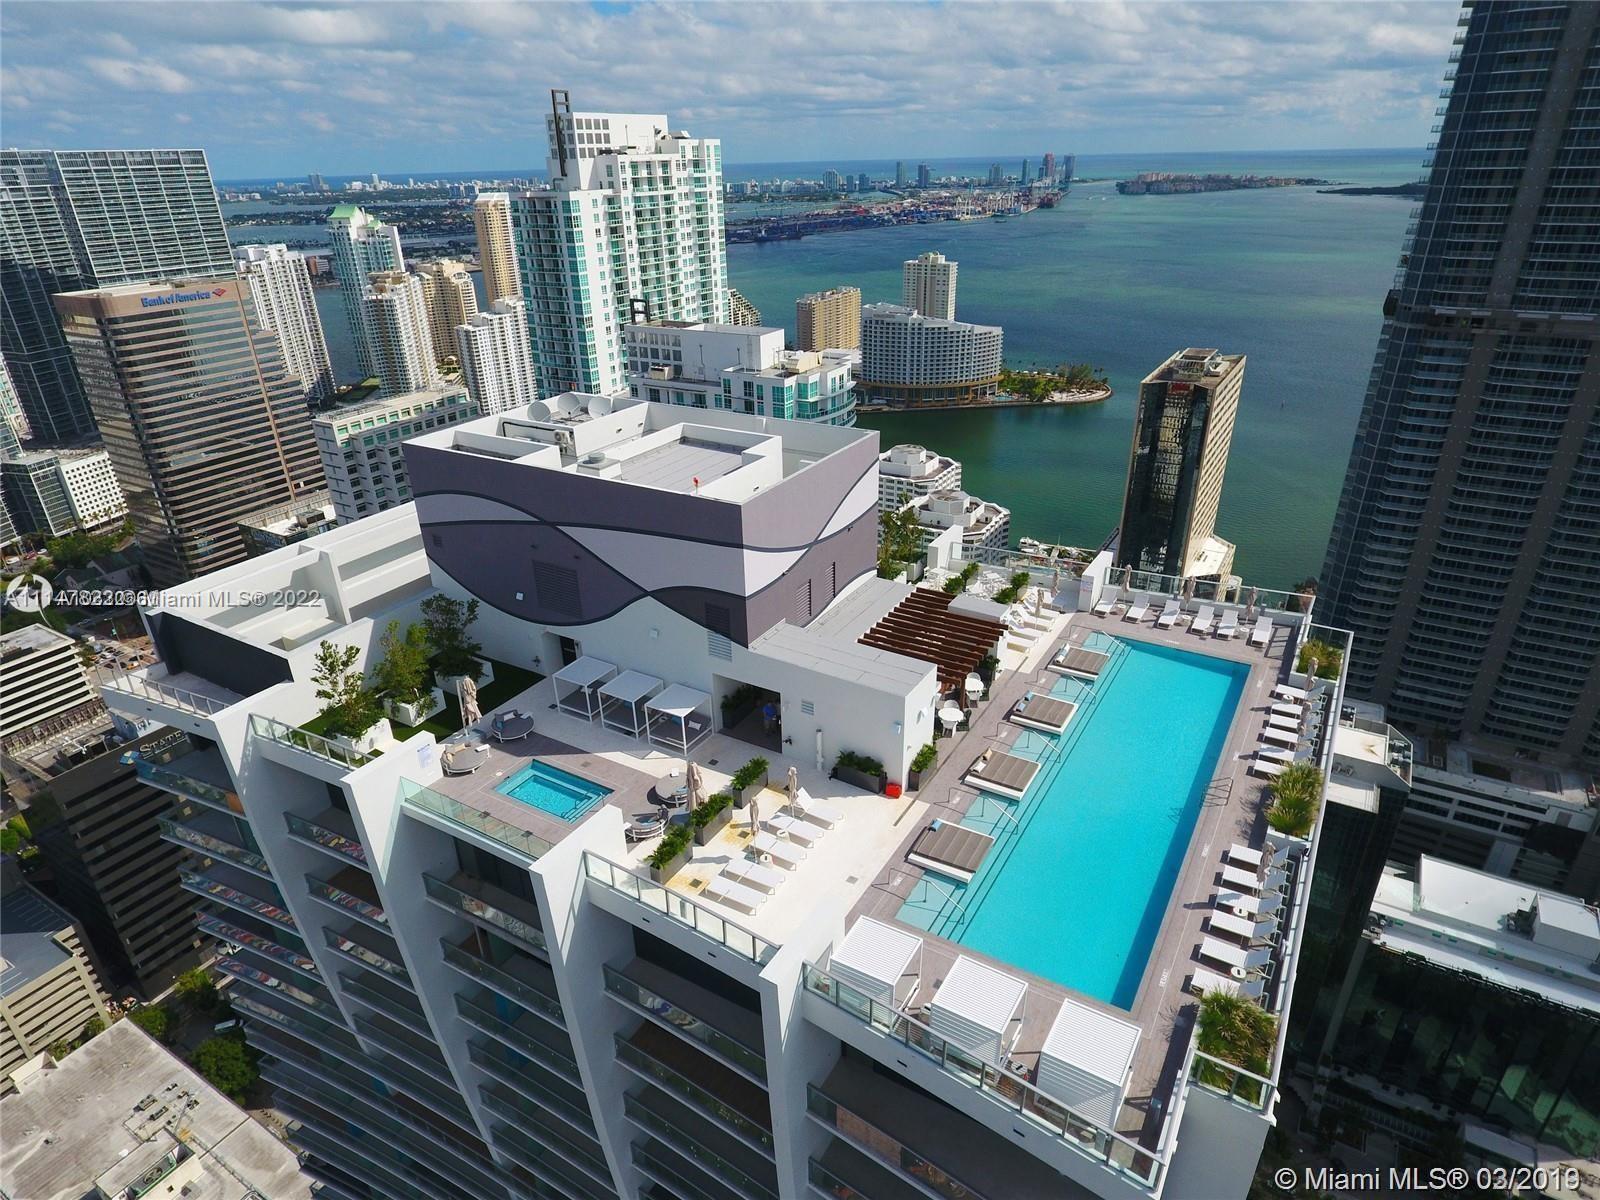 Beautiful apartment in the heart of Brickell, close to all the restaurants and shops, amenities like no other one in the area. Top of the line appliances, two swimming pools, basketball court, children playground, state of the art gym, spa, sauna, roof top theater with a beautiful view of the city.